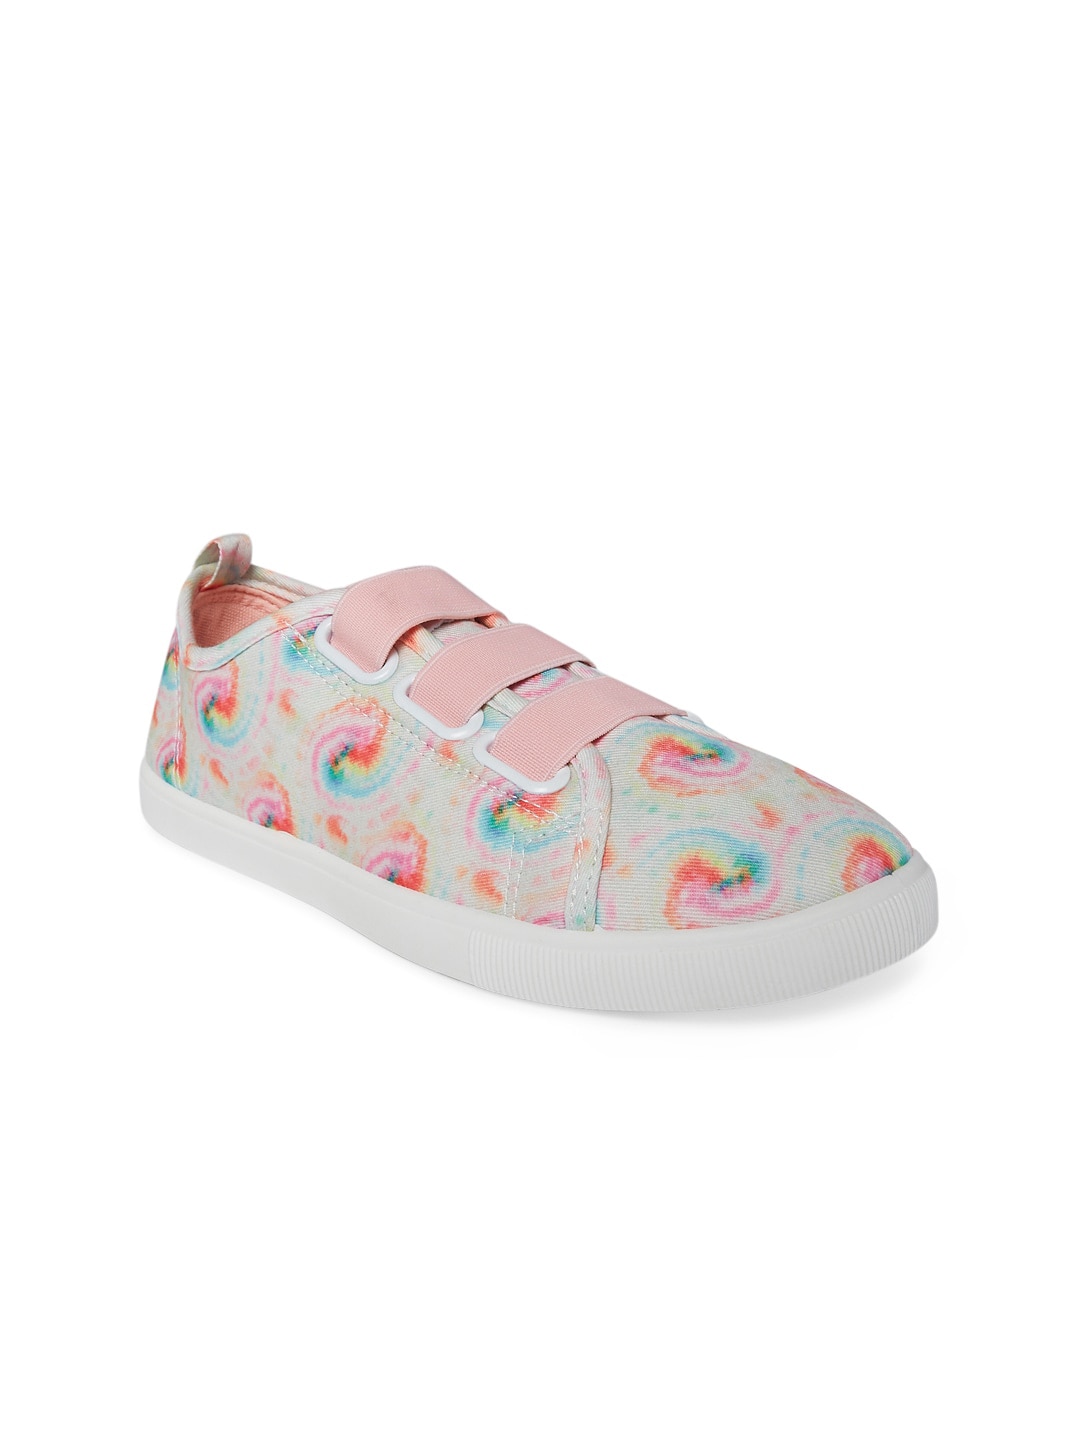 Forever Glam by Pantaloons Women Cream-Coloured Printed Sneakers Price in India